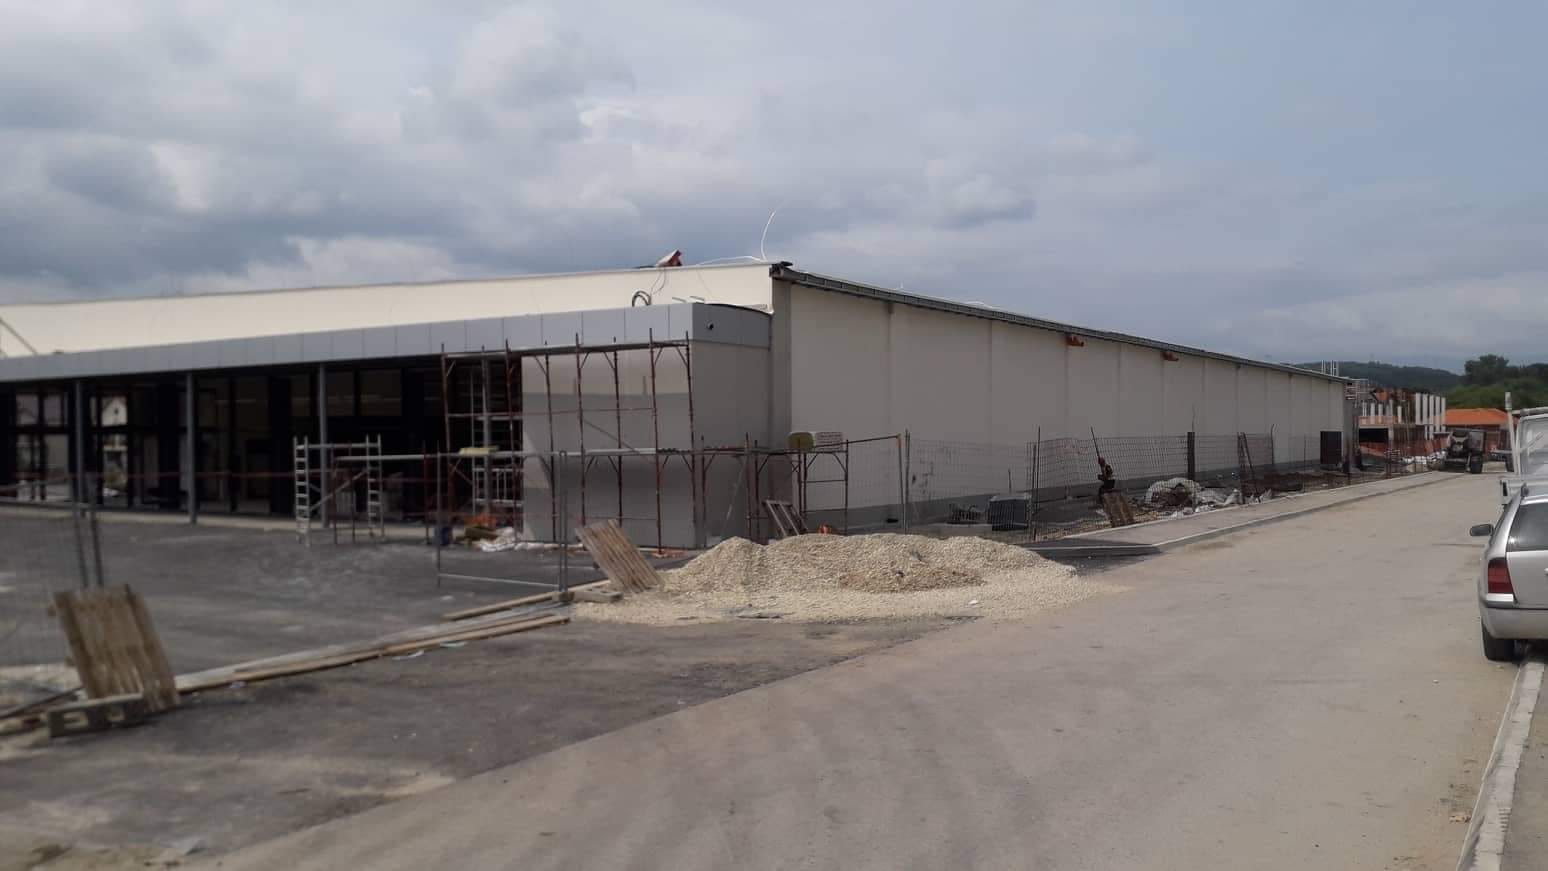 Construction works have commenced on the implementation of electrical, telecommunications, and signaling installations at the "Lidl" facility in Pr...